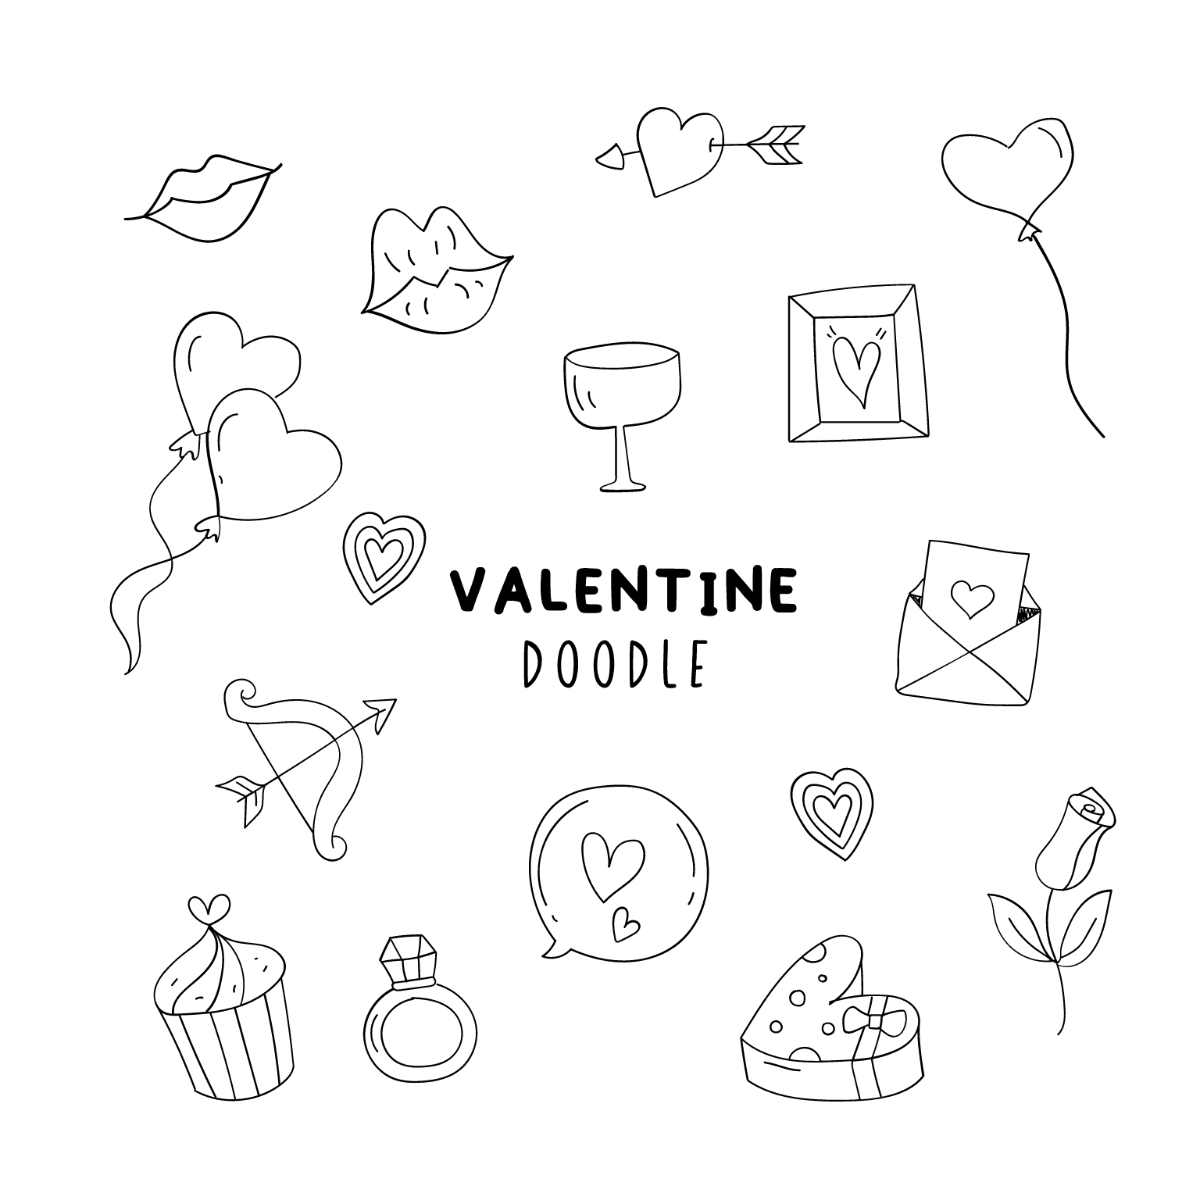 FREE Valentine's Day Drawing Templates & Examples - Edit Online & Download